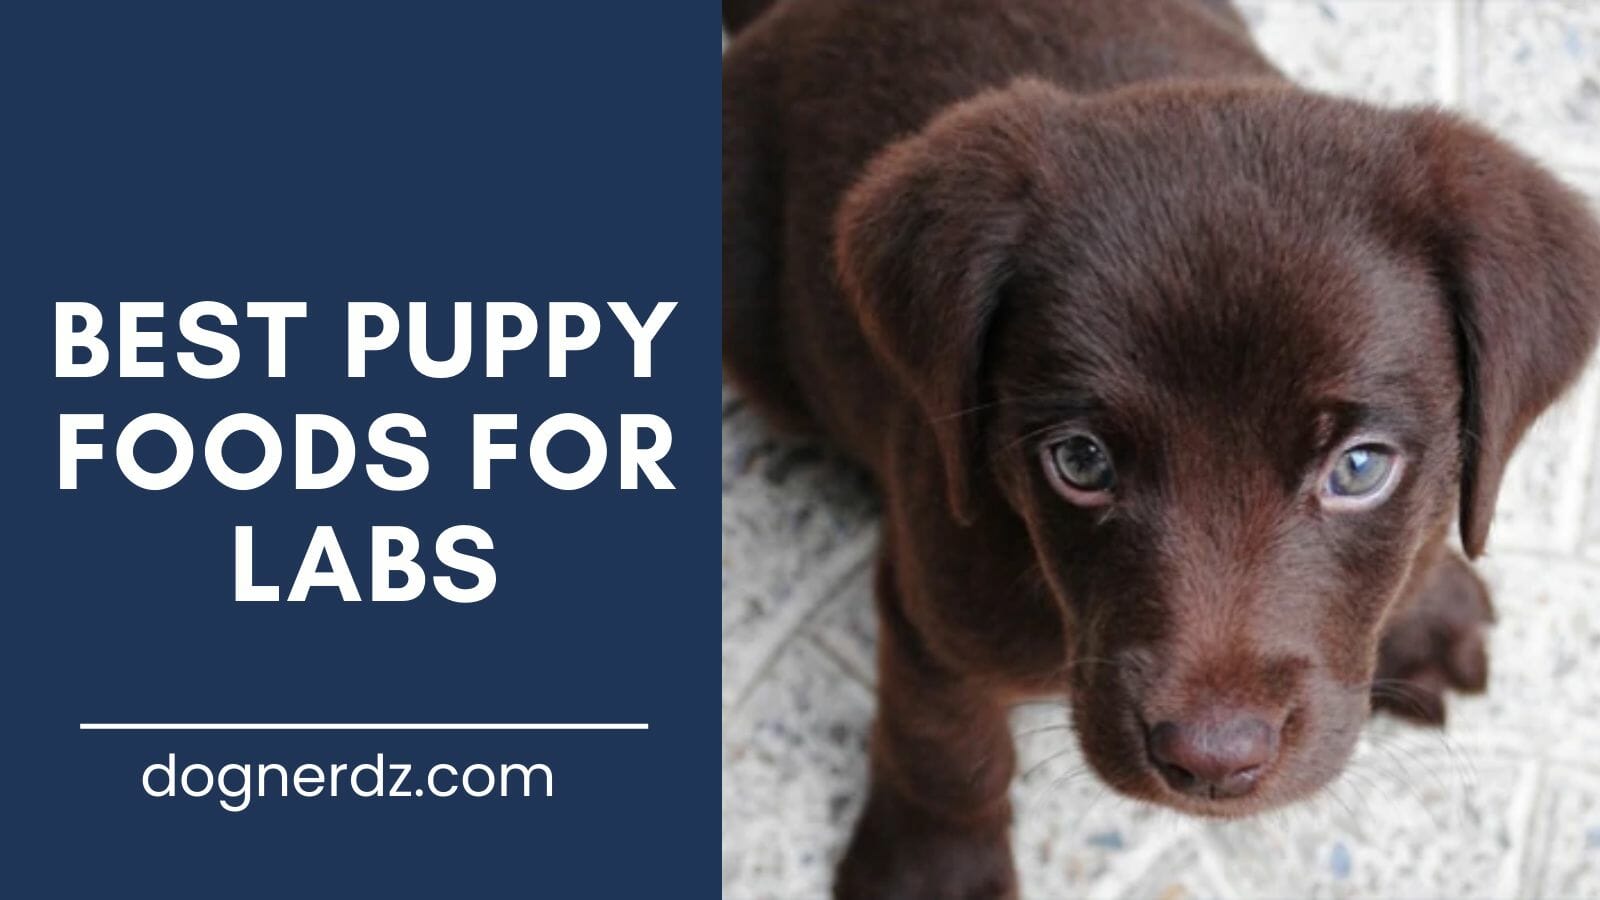 review of the best puppy foods for labs